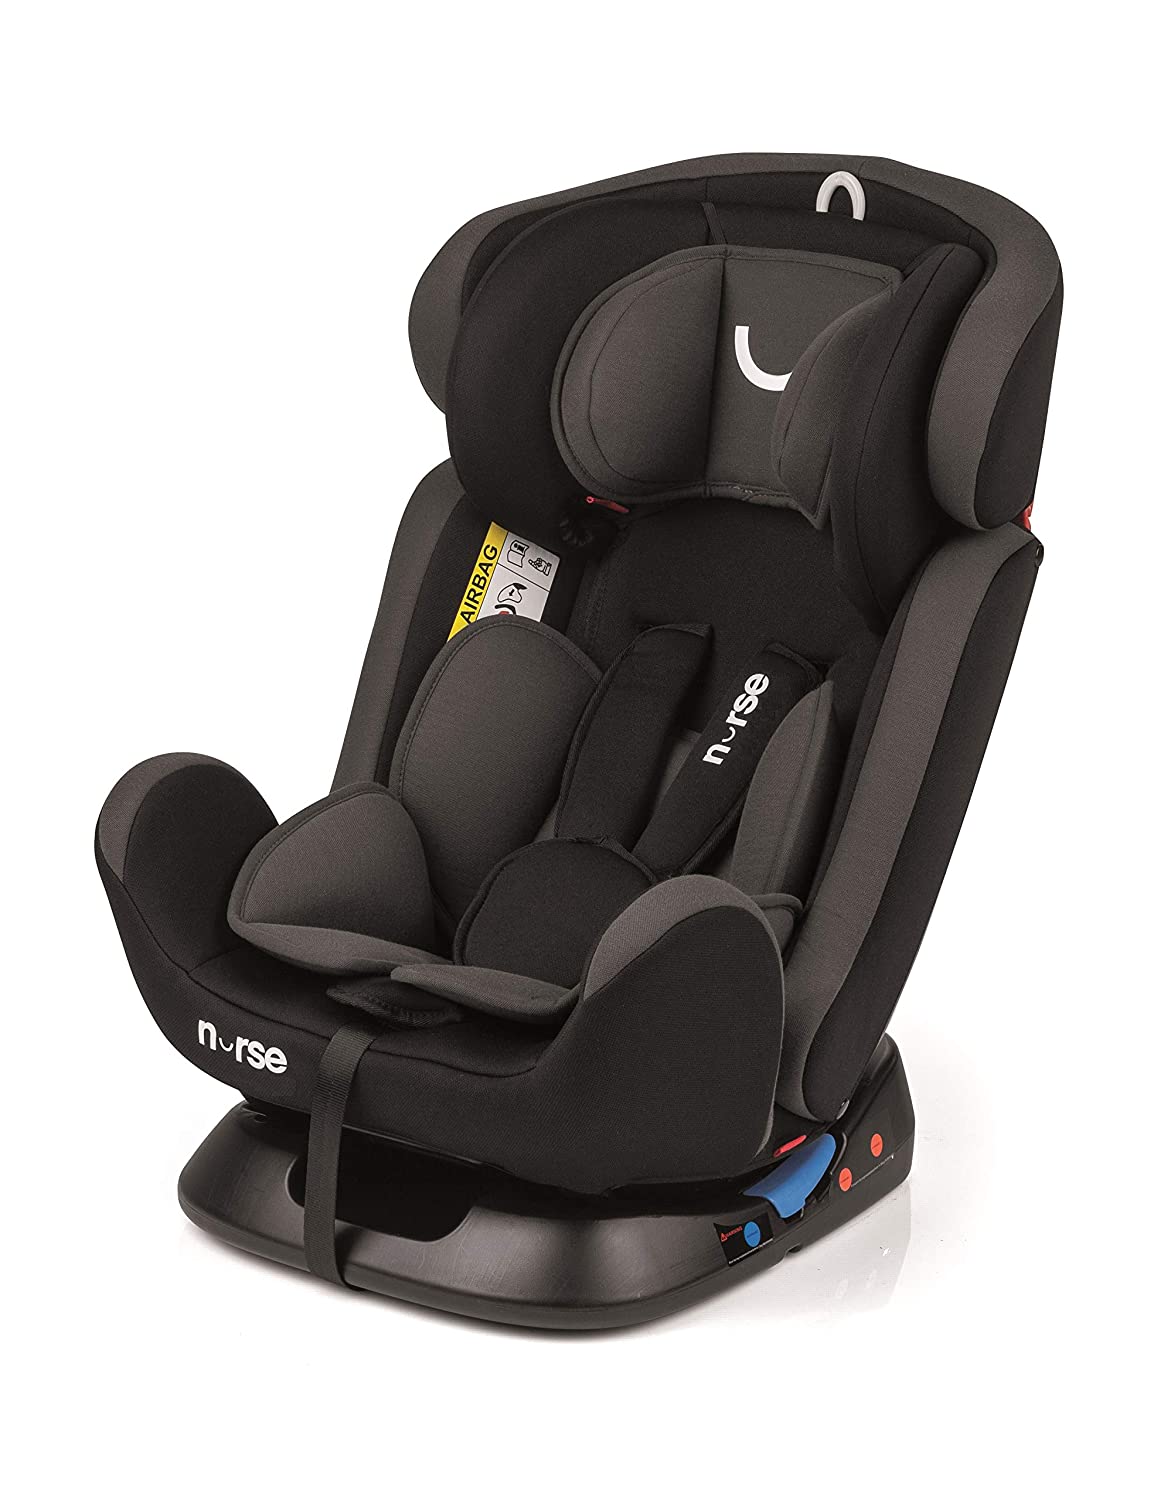 Nurse by Jané Shield 7013 487 Child Seat Group 0 1 2 3 from 0 to 36 kg Installation with Vehicle Belt Maximum Recline with Seat Reducer Black 6.3 kg